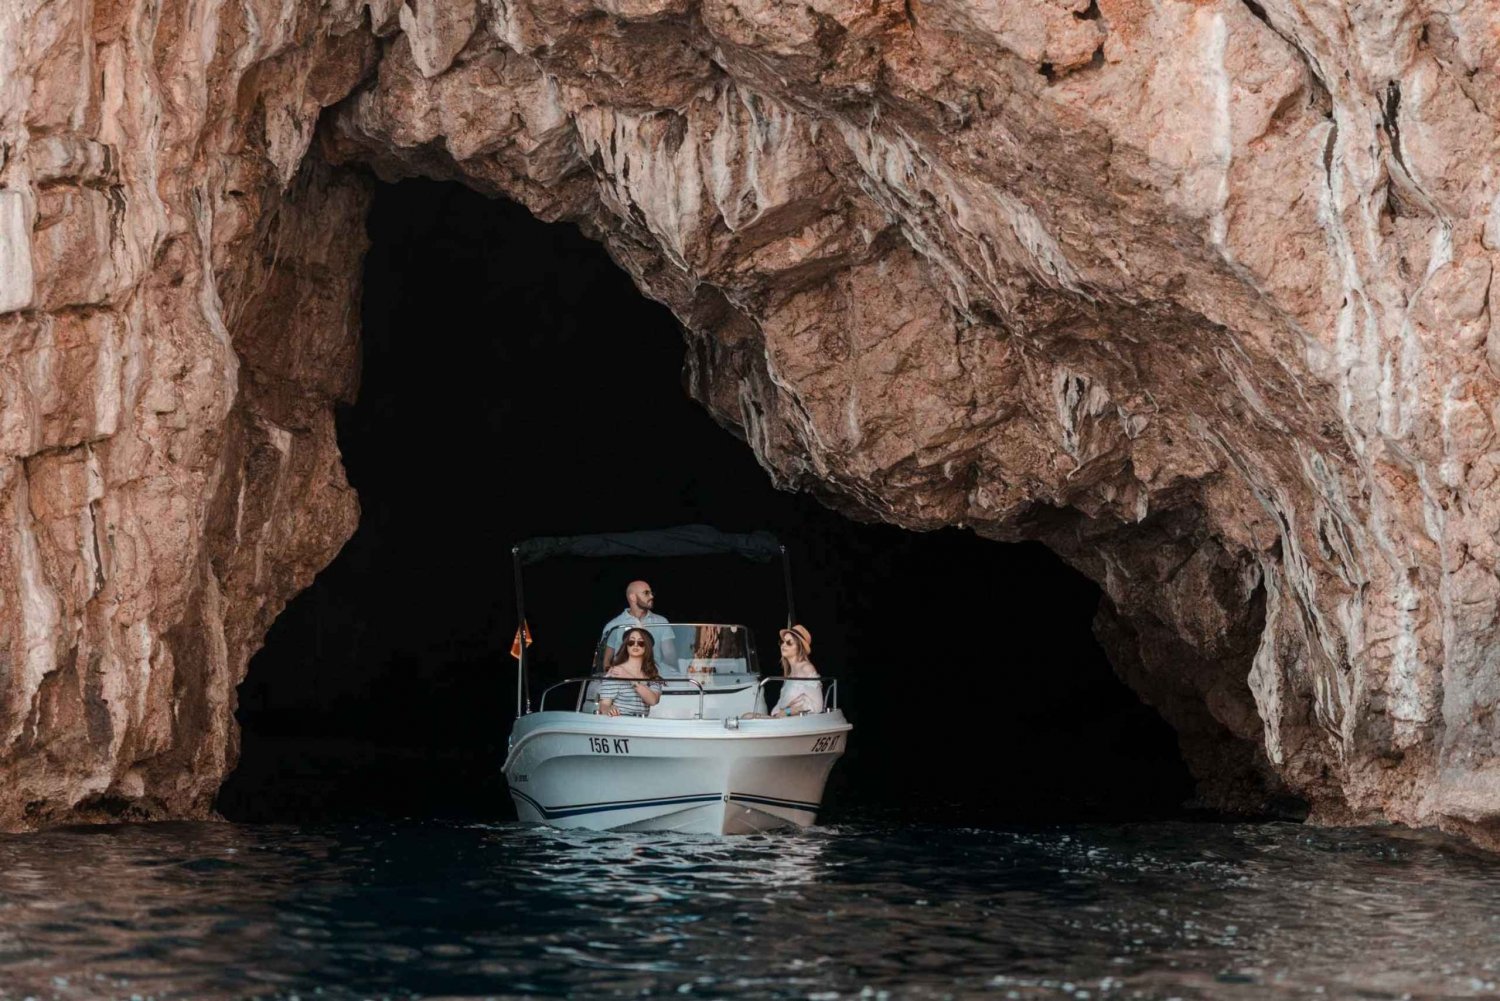 Kotor: Blue Cave 3h Private Tour (up to 7 pax)